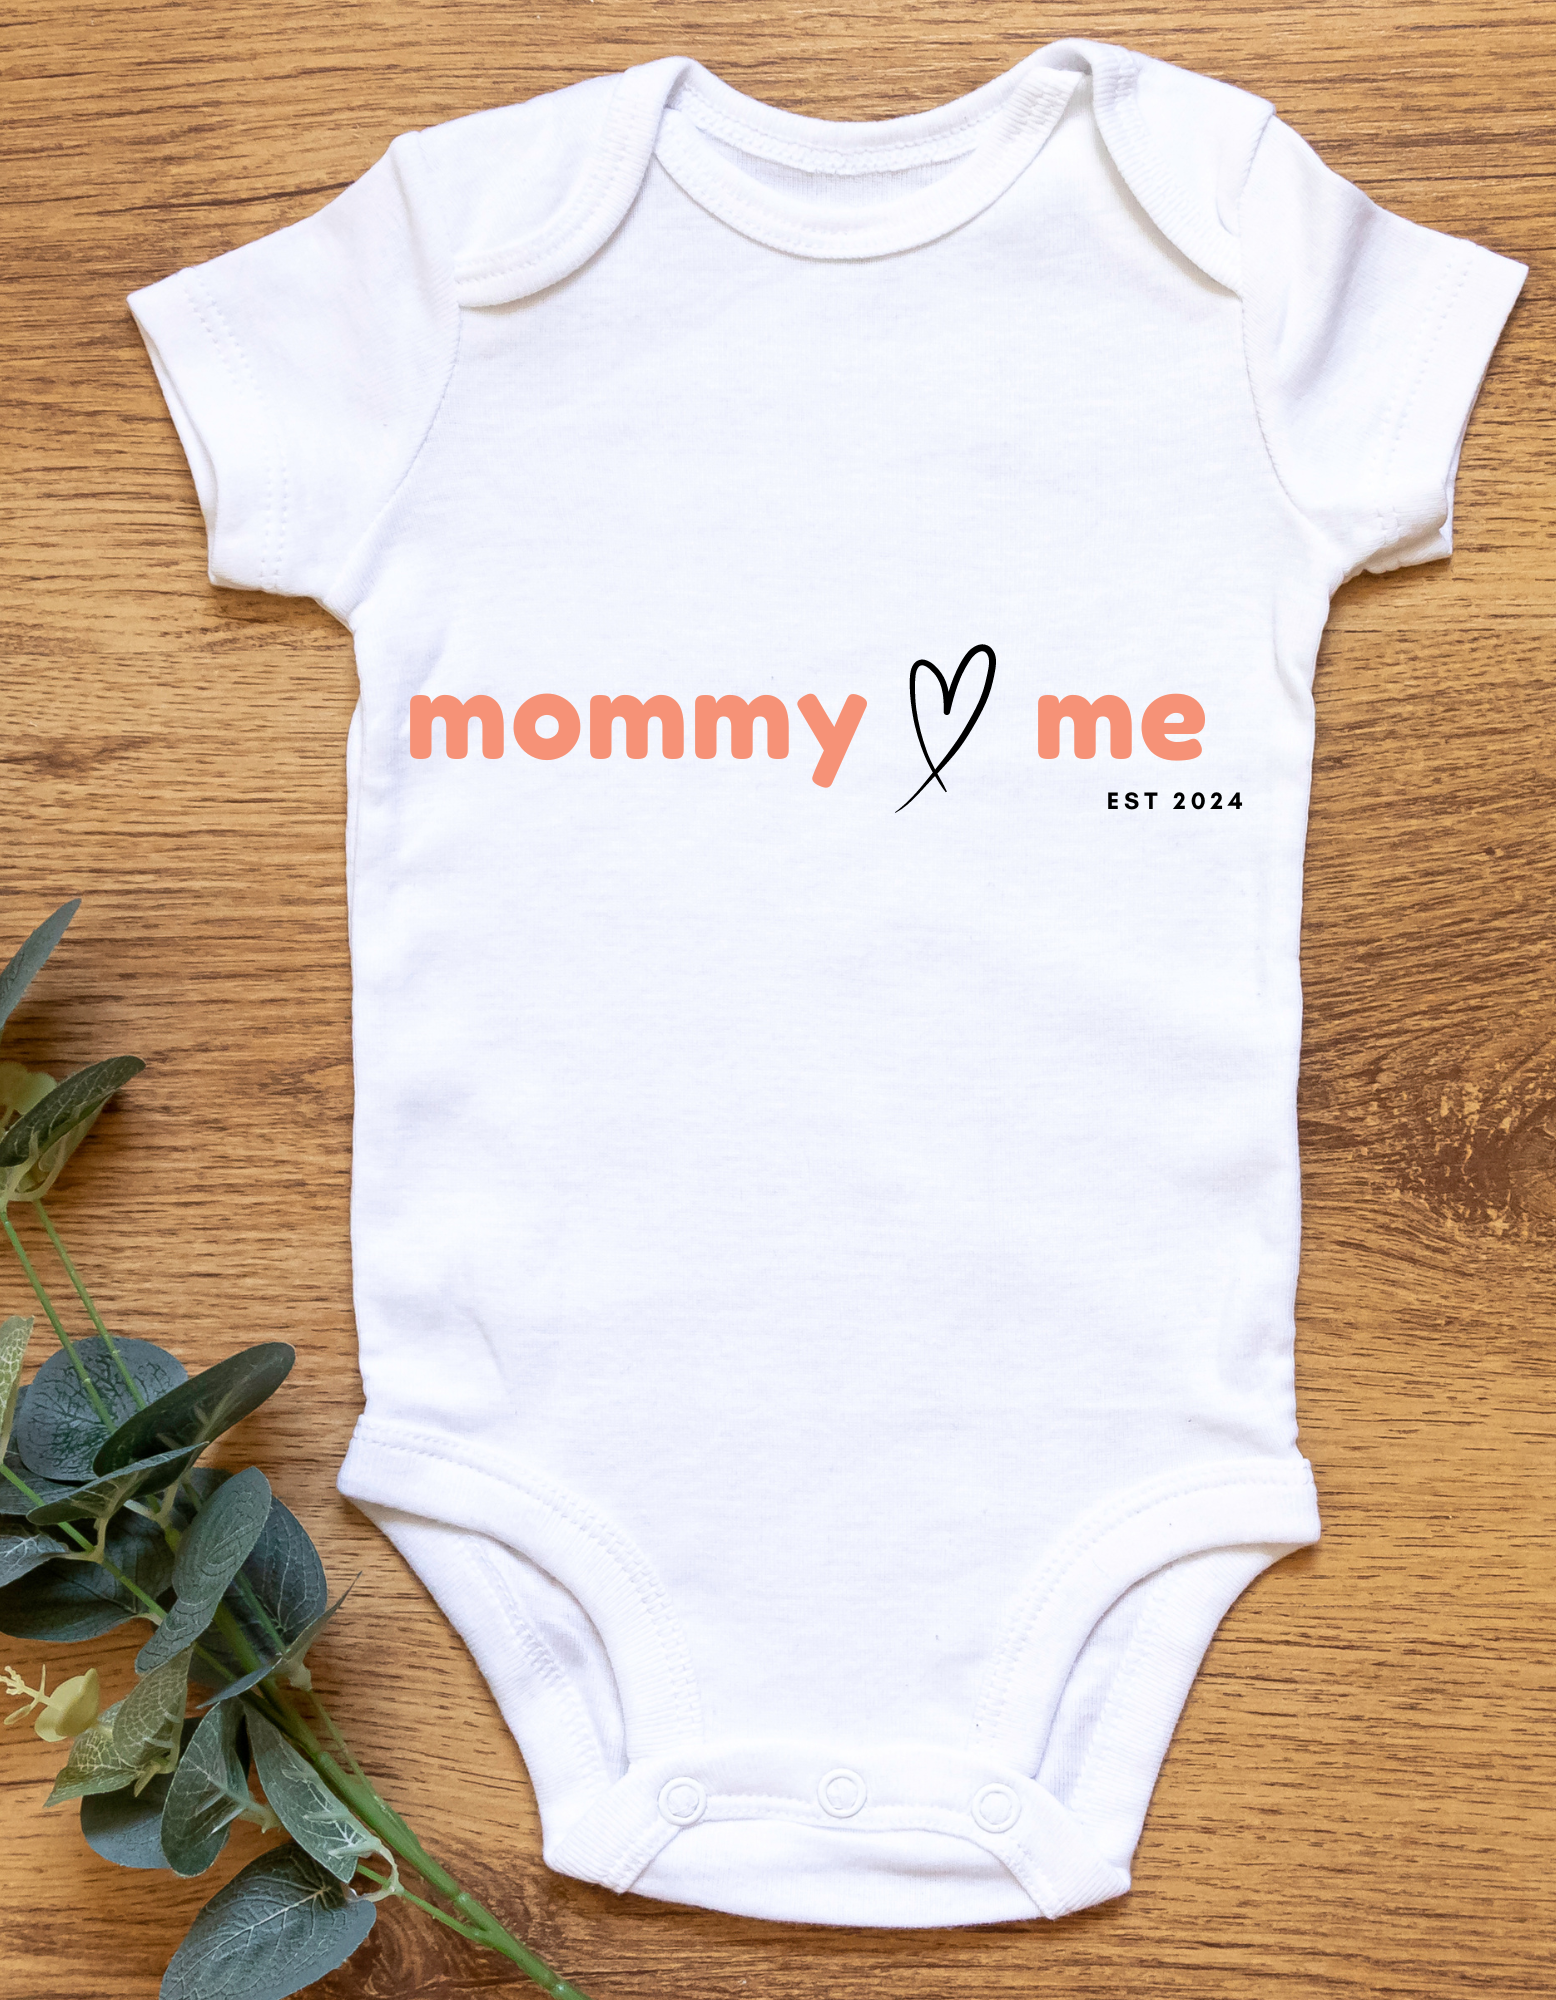 A white onesie with a Mommy heart Me EST 2024 saying.